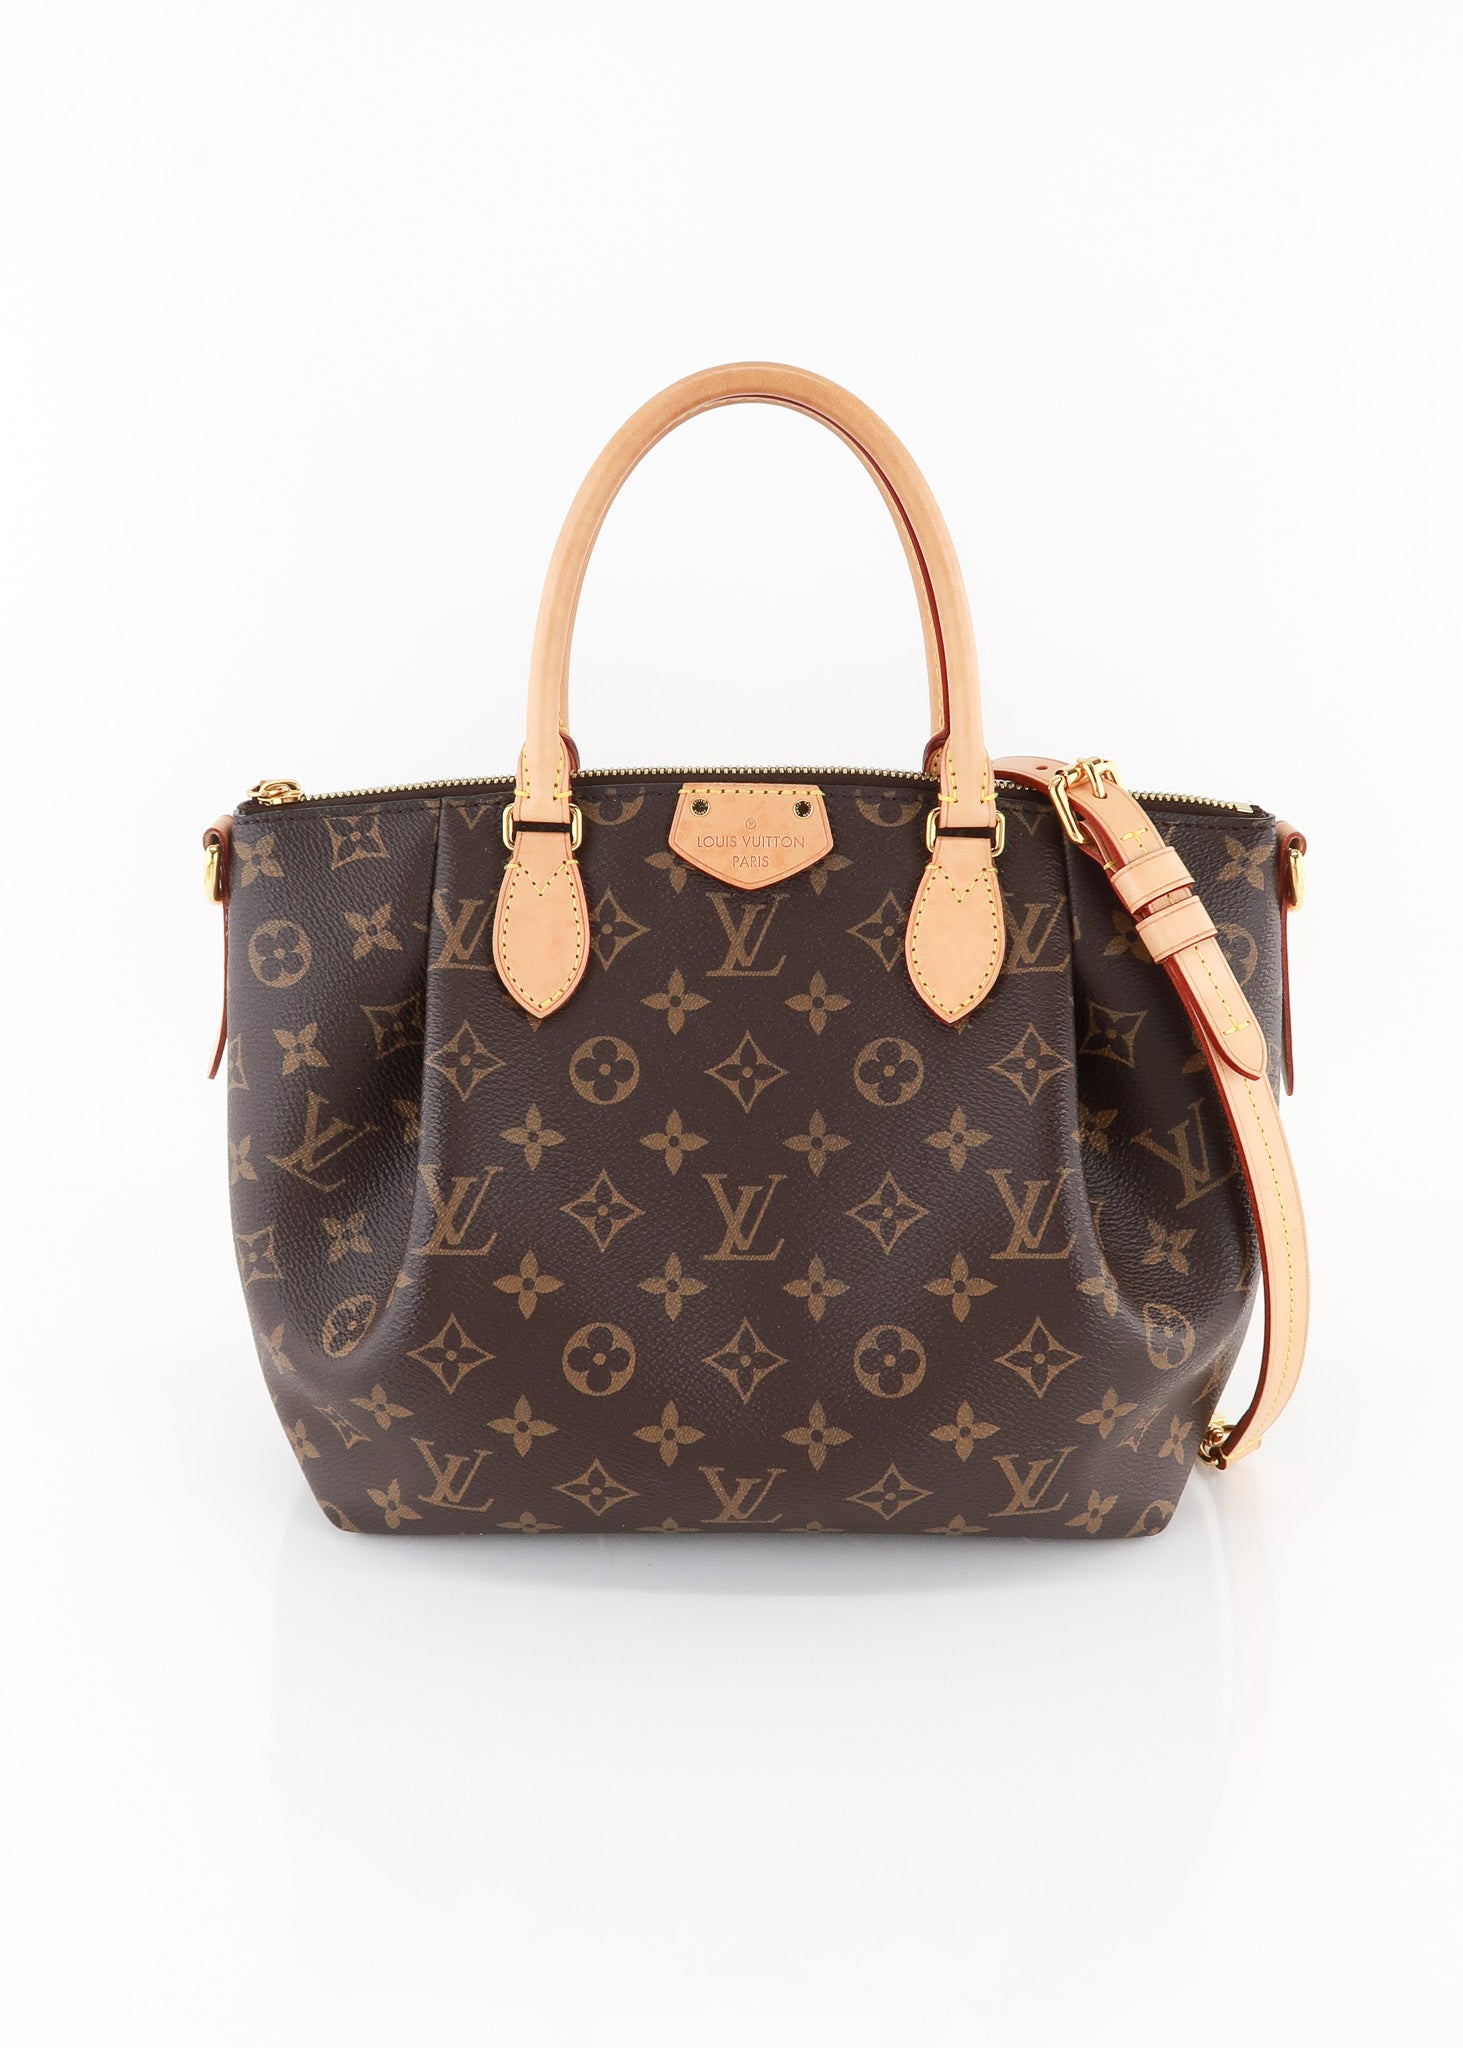 Turenne MM Louis Vuitton for sale if interested